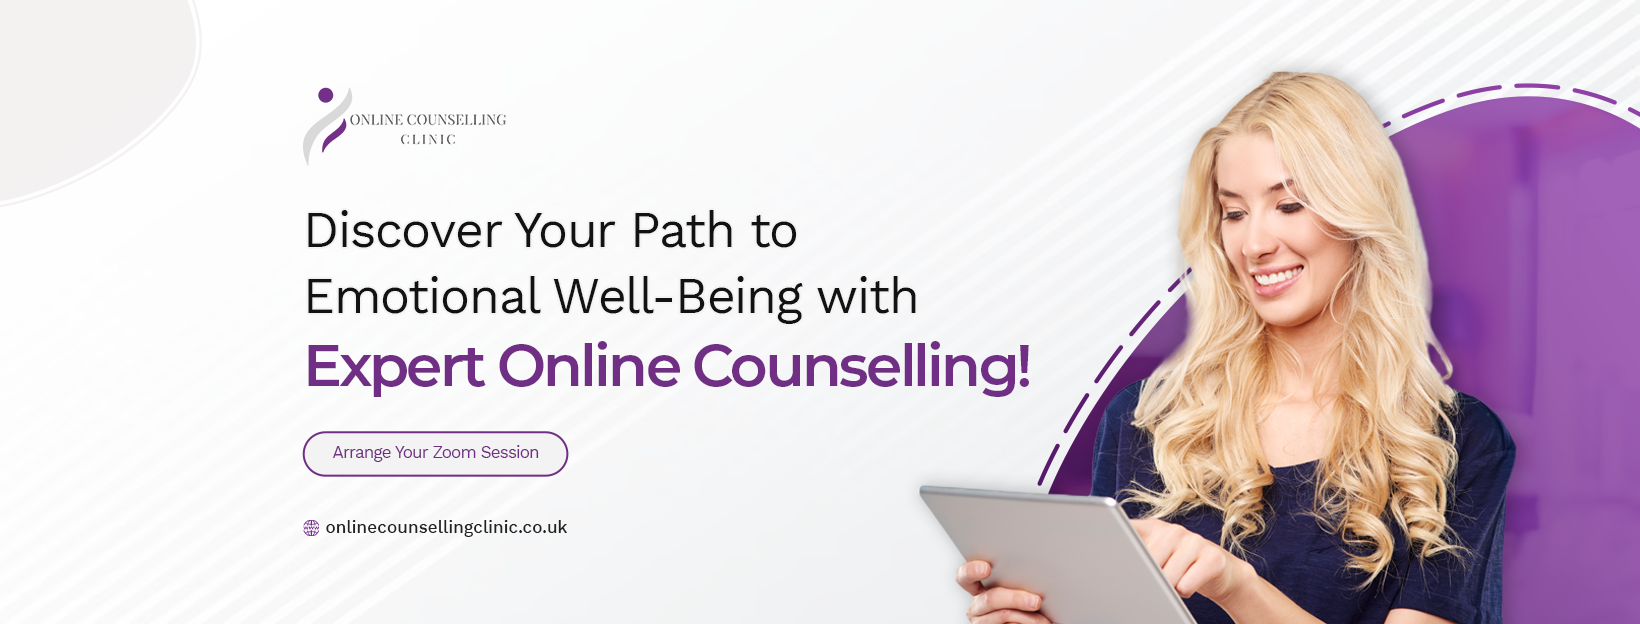 Online Counselling Clinic 